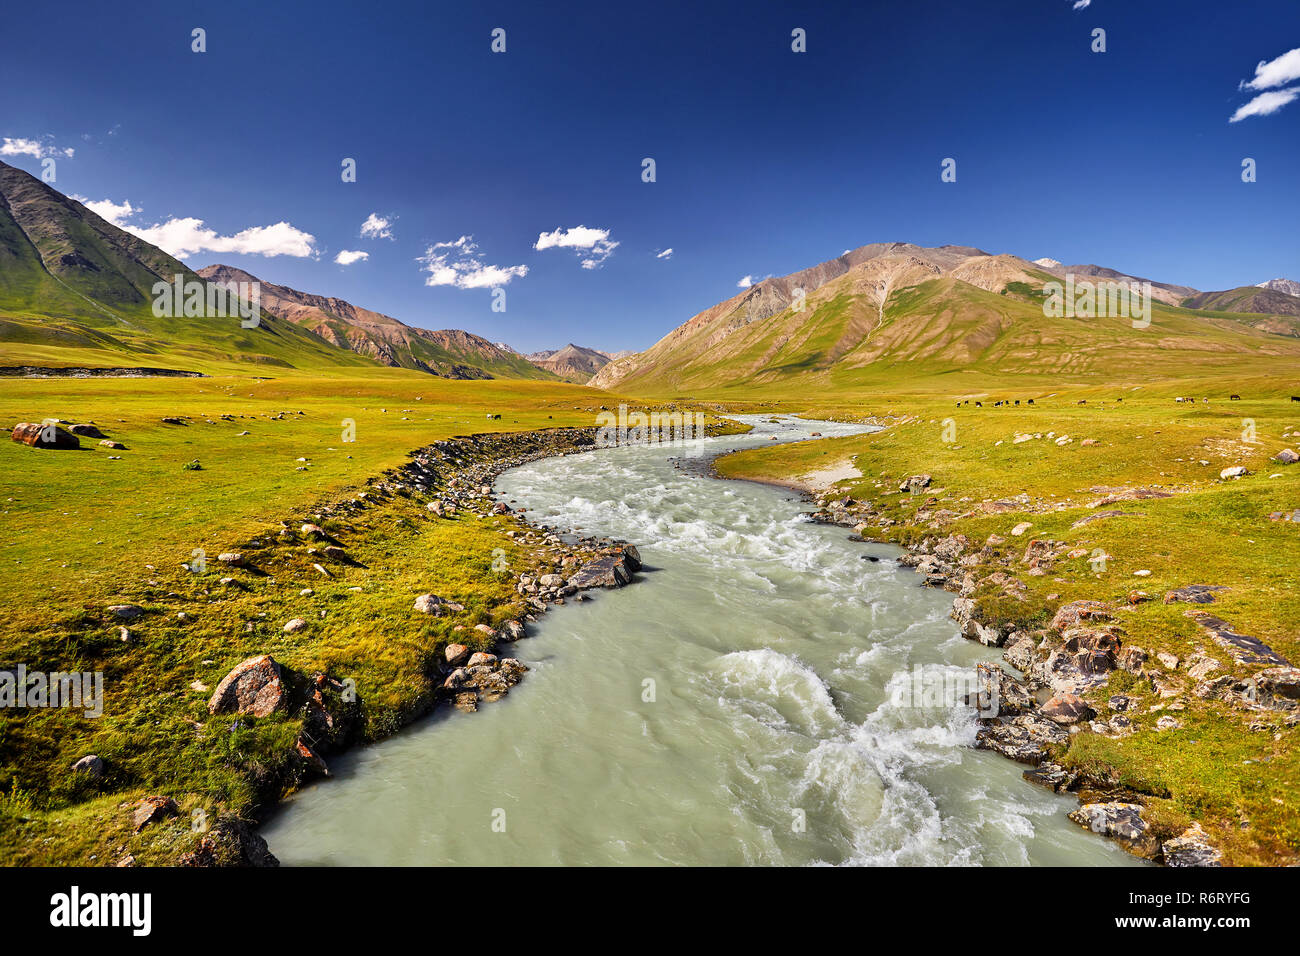 Mountain river in the mountain valley at blue sky in Kyrgyzstan Stock Photo